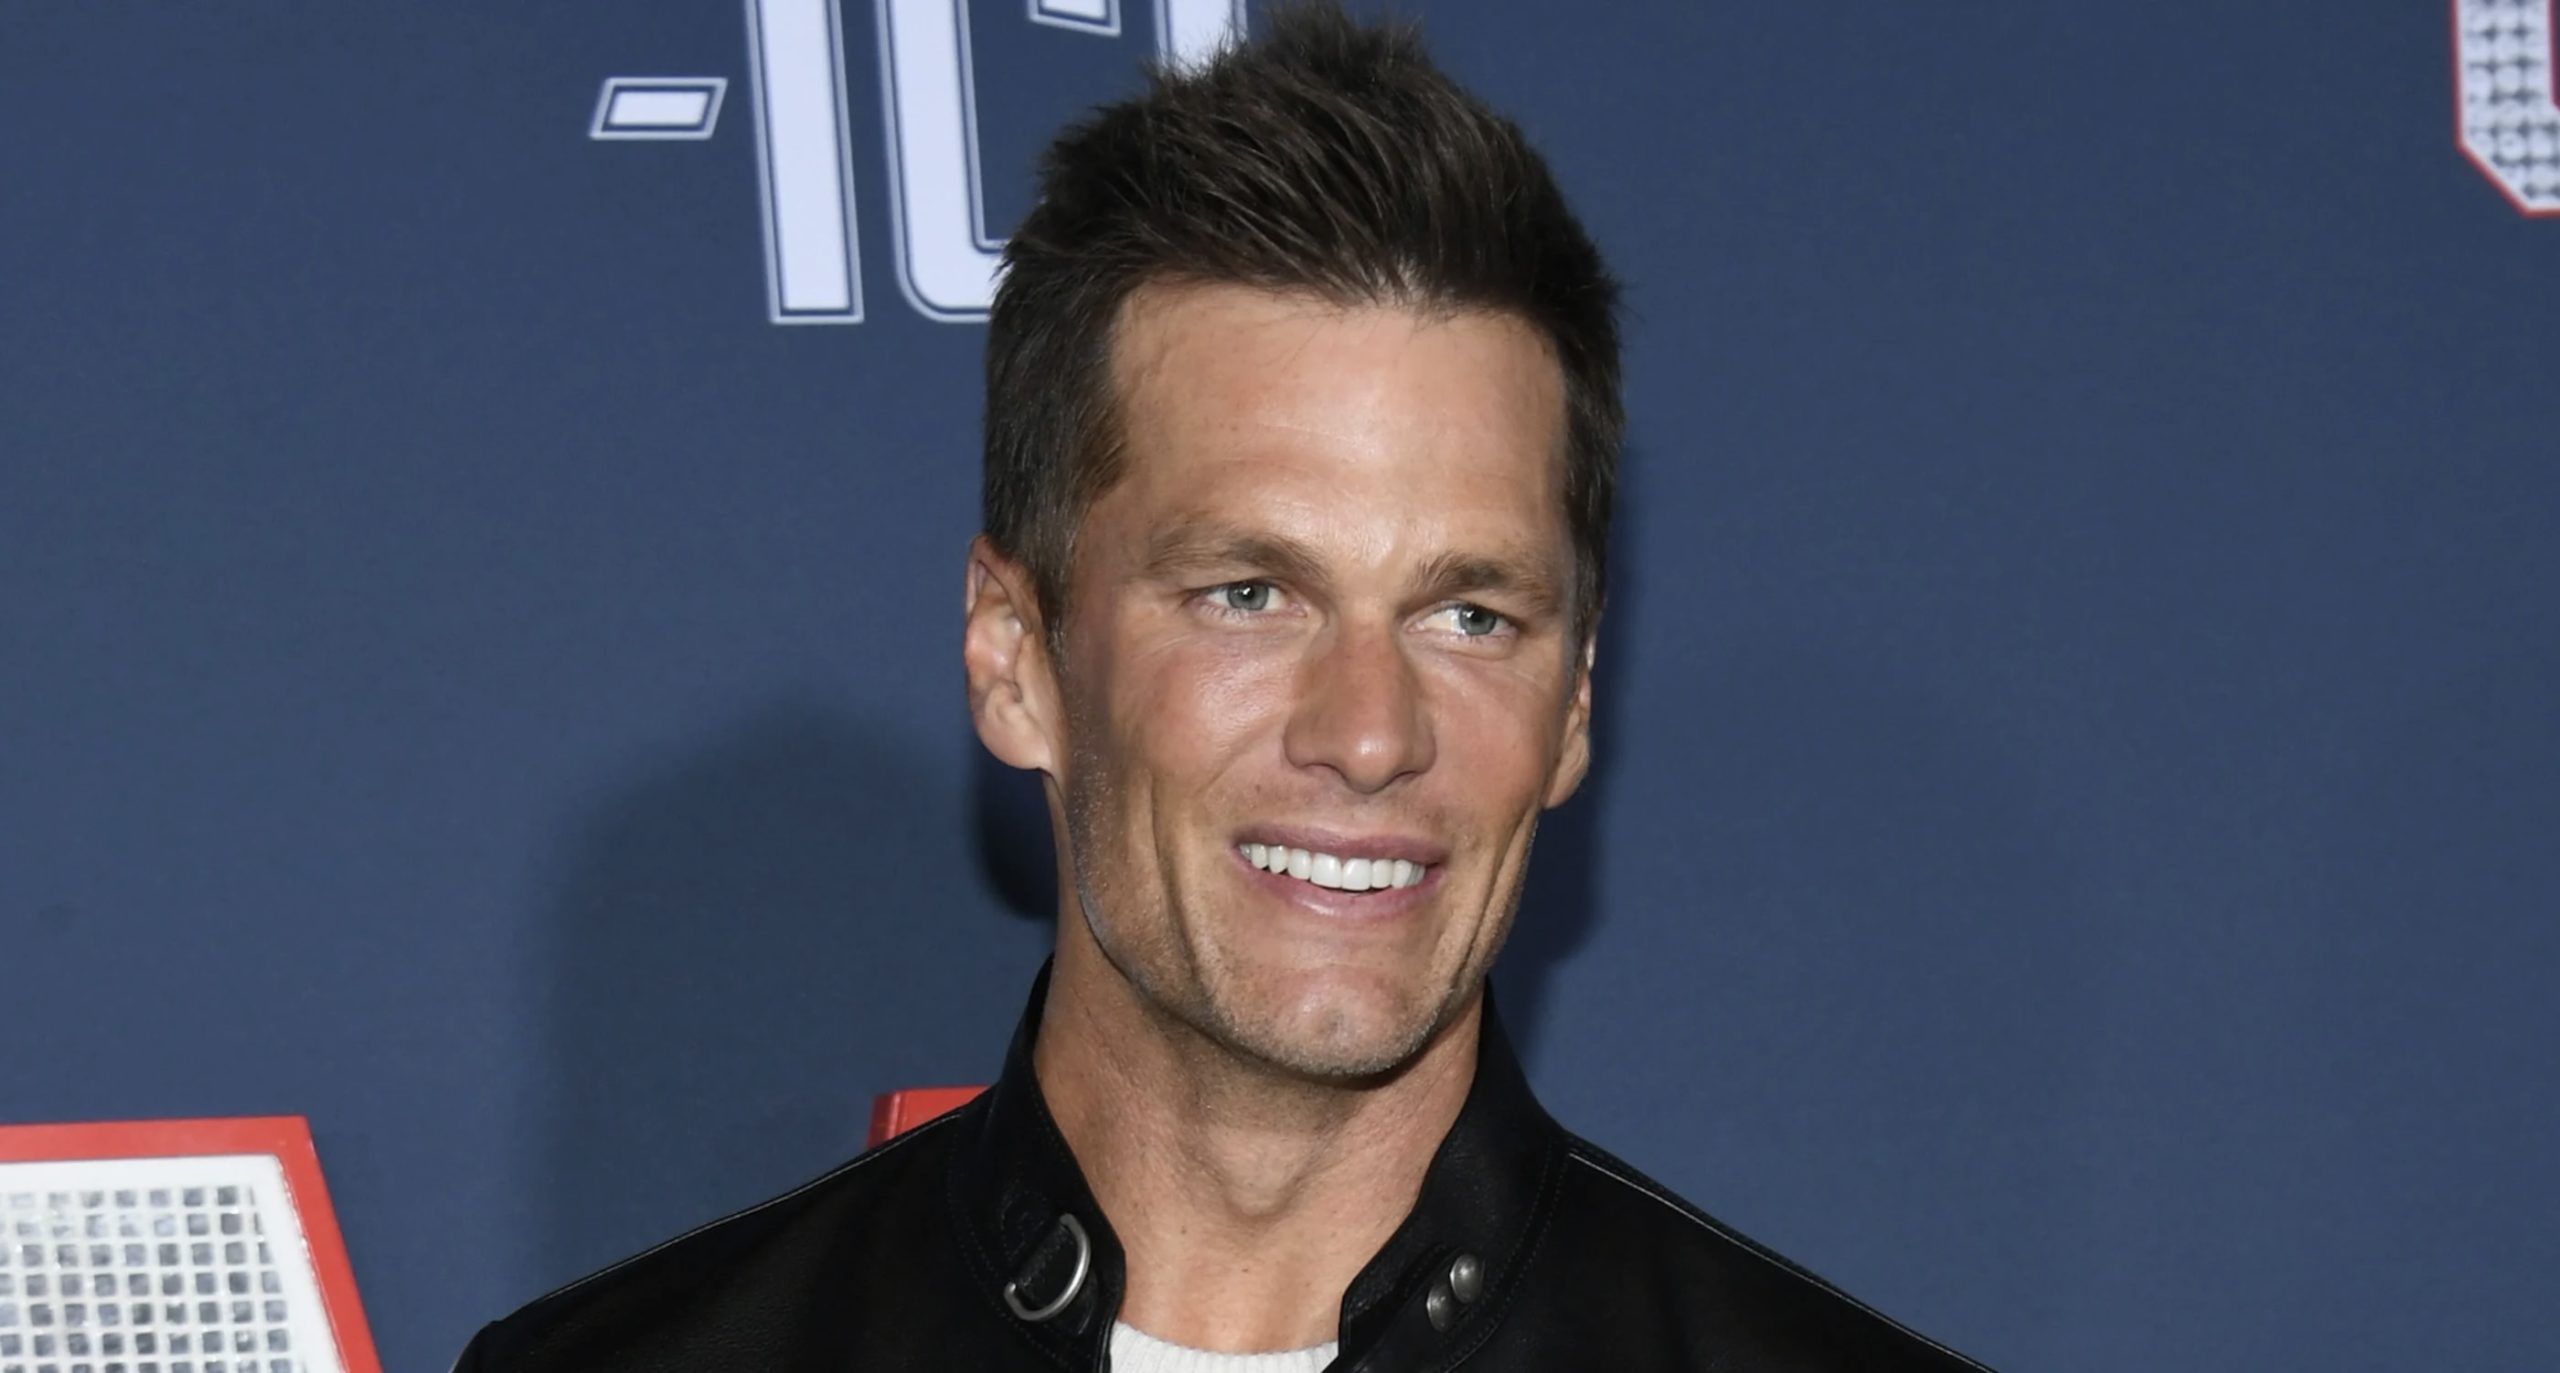 Tom Brady Addresses Speculation He’s Coming Out of Retirement Again